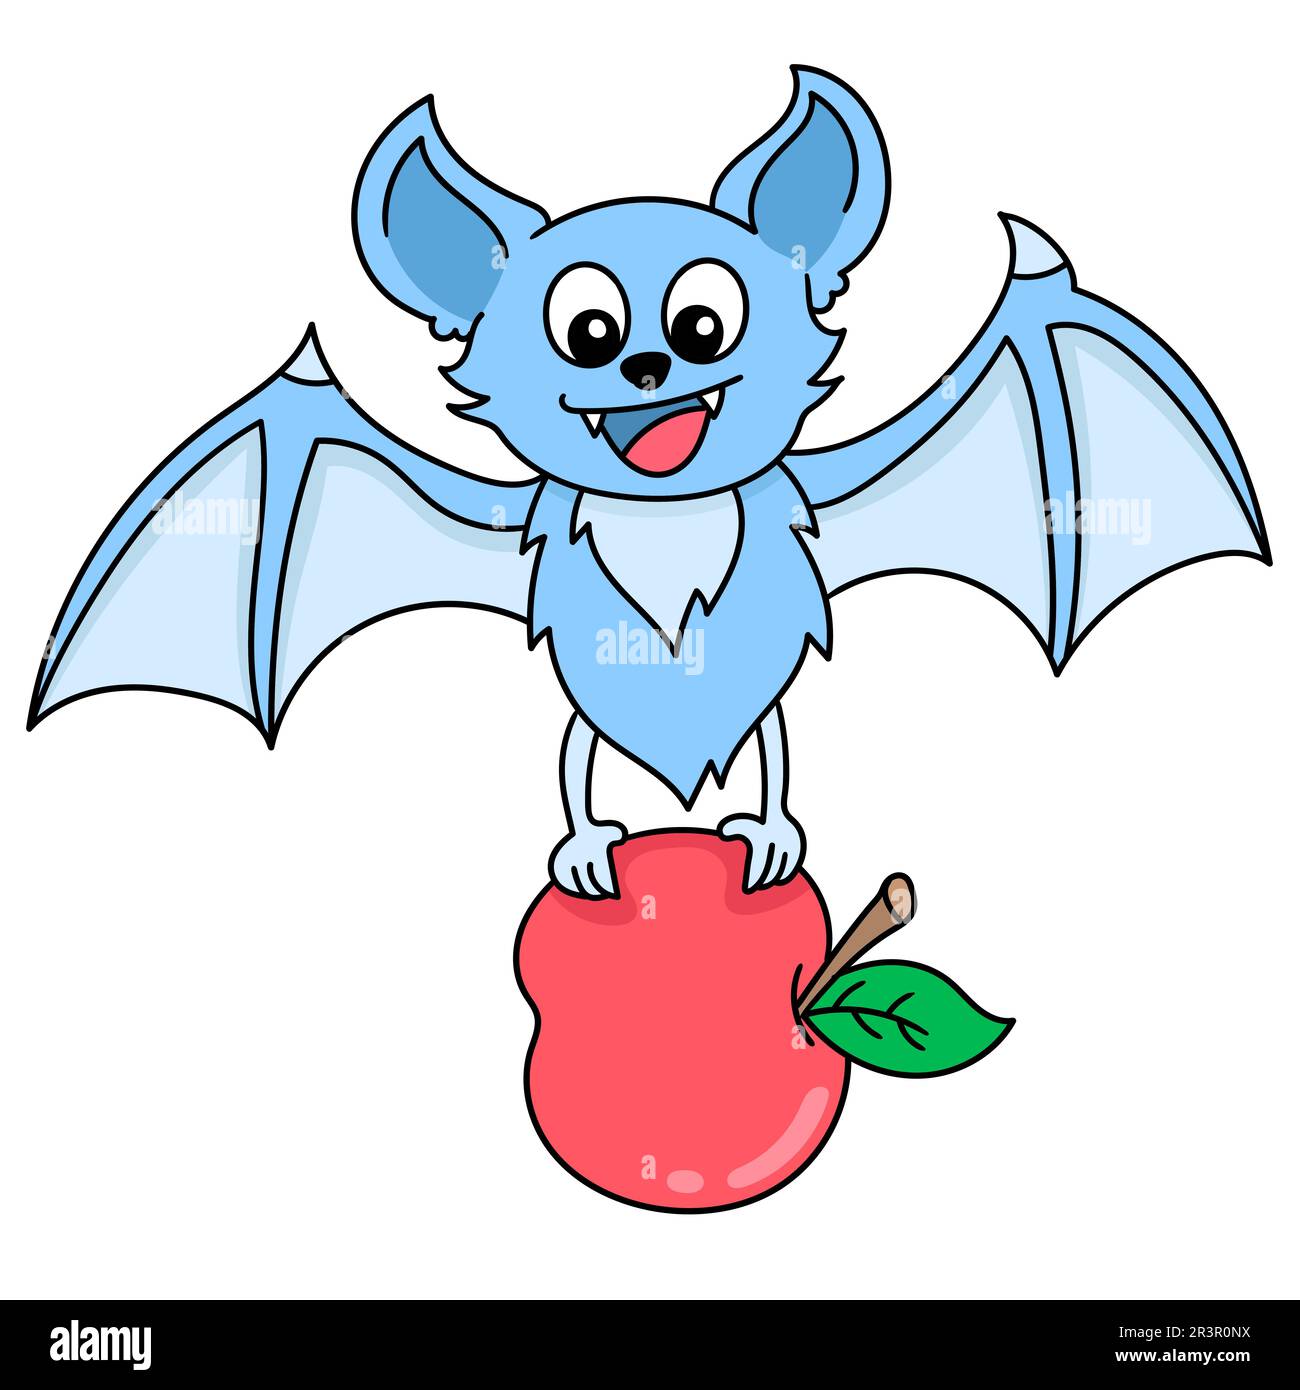 A cute flying bat clutching an apple, doodle kawaii. doodle icon image Stock Photo